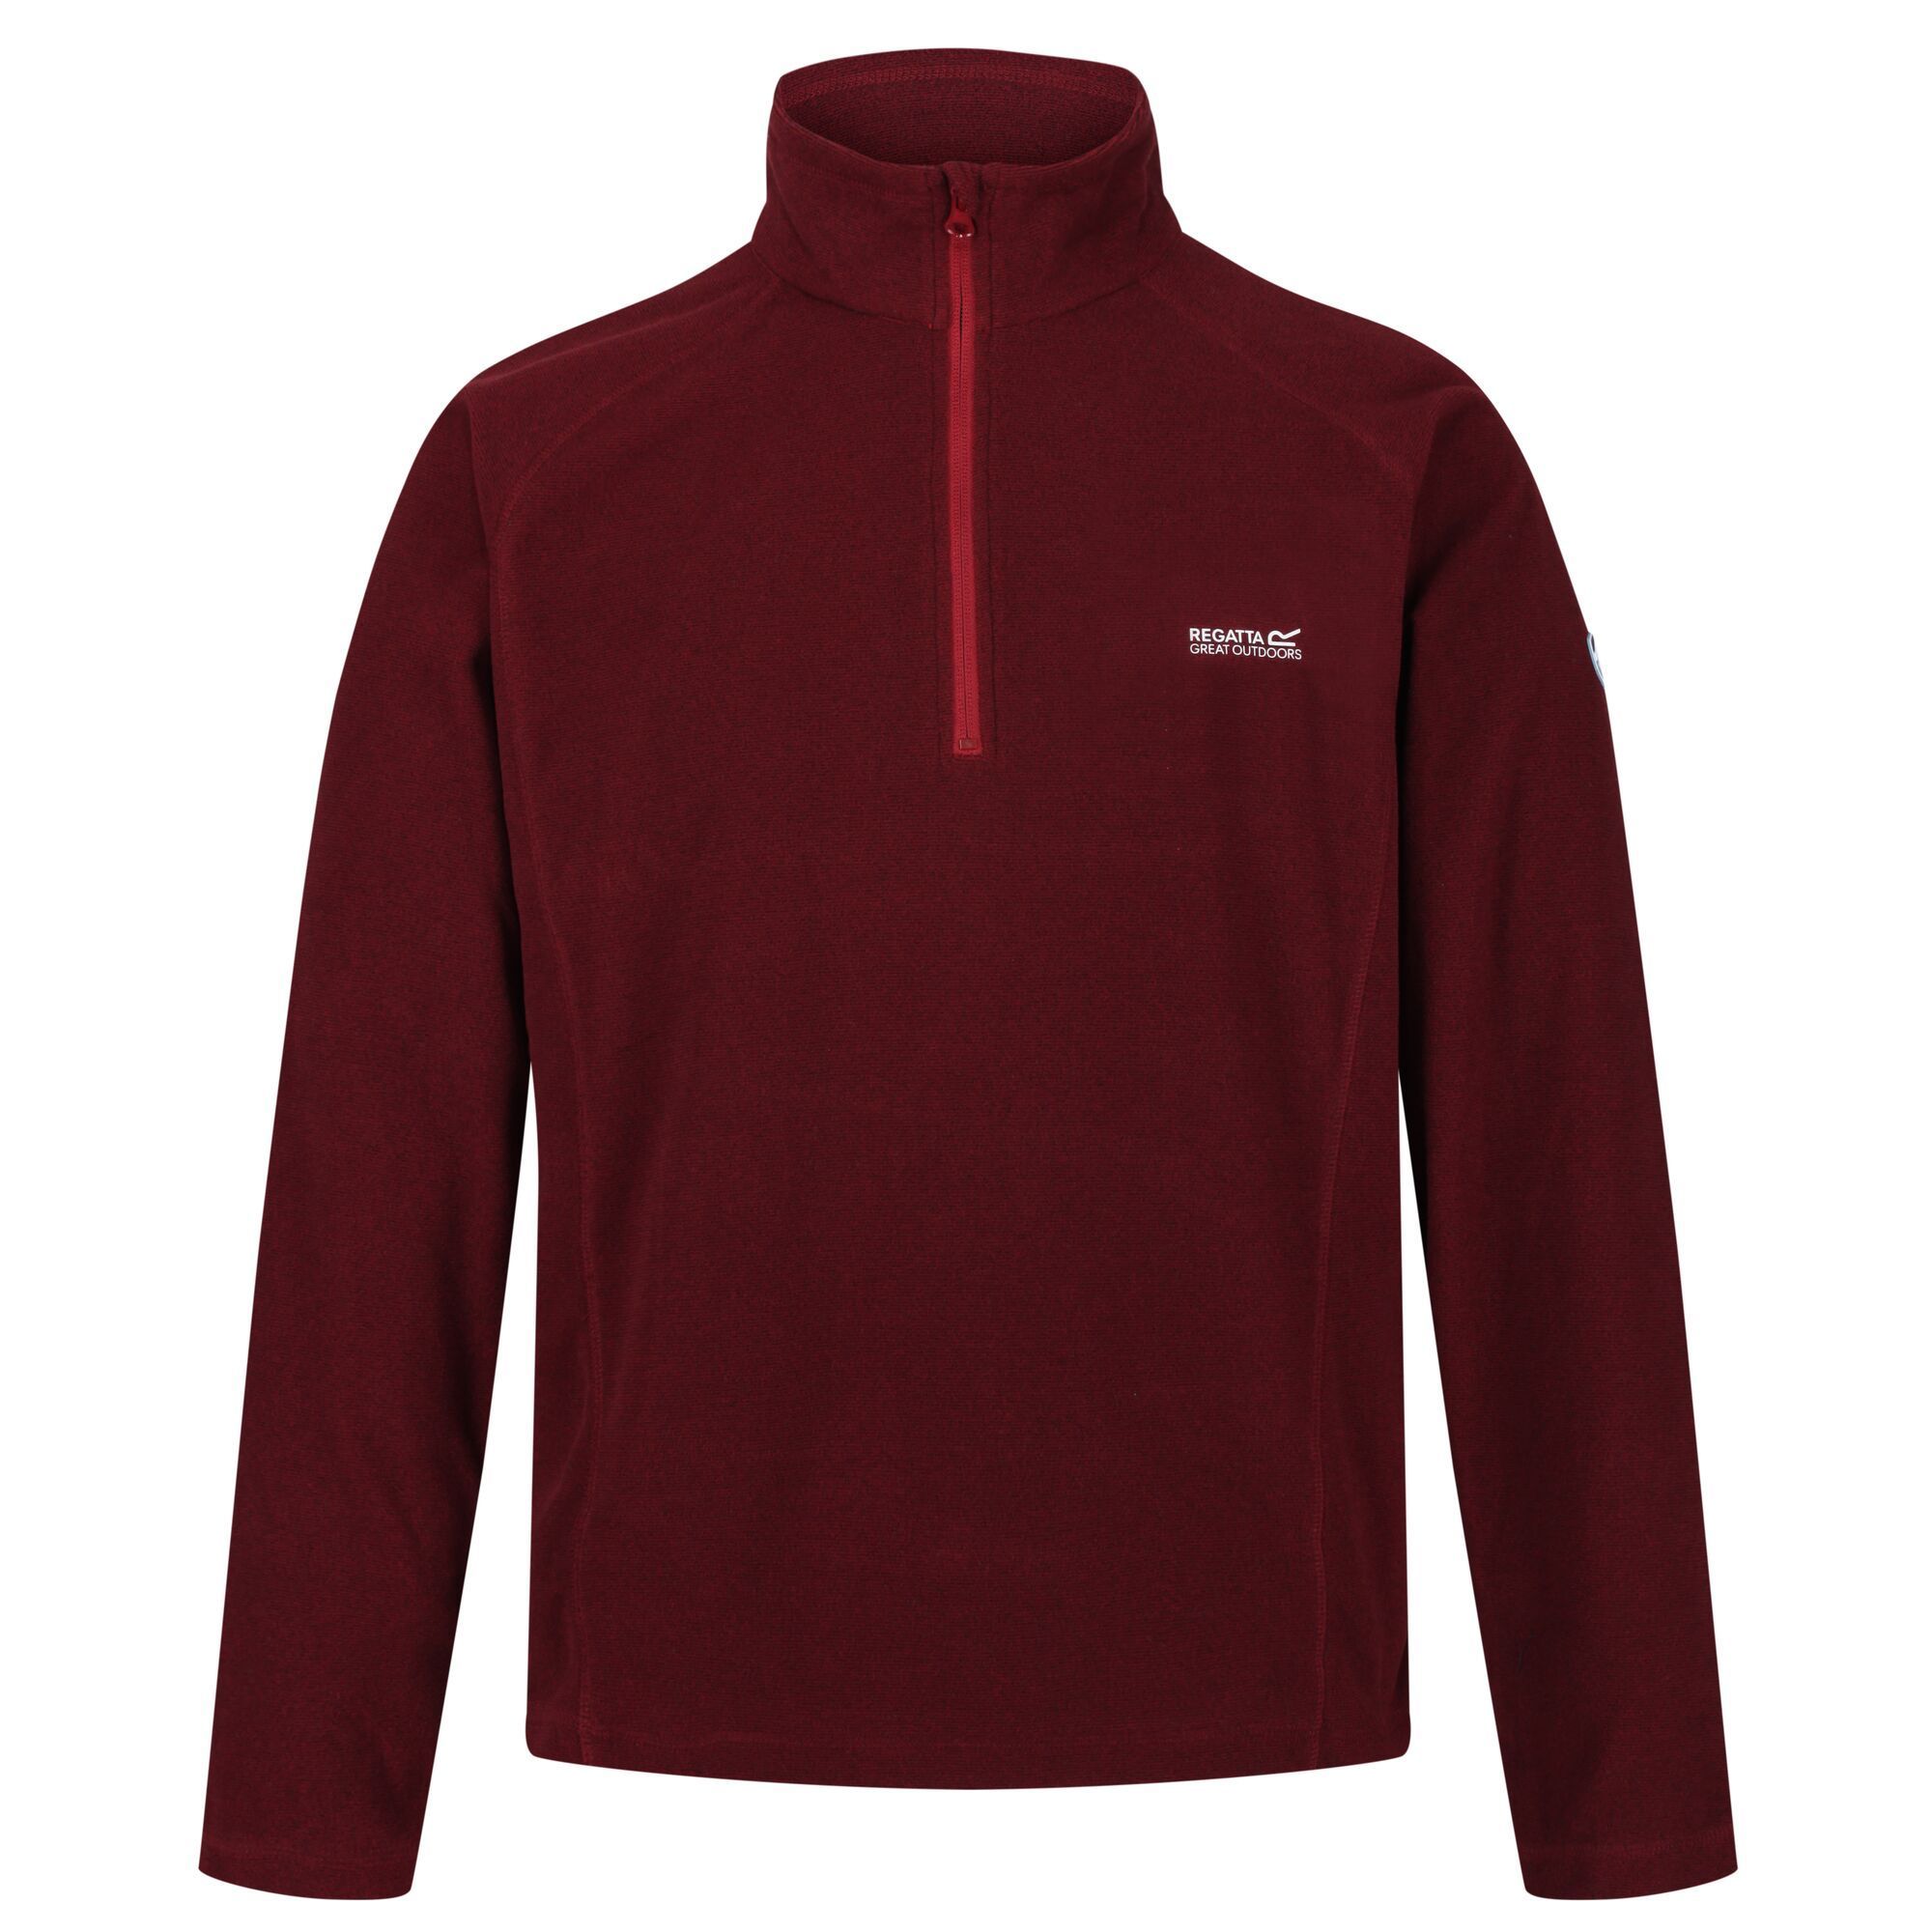 100% fleece. Mid layer fleece jacket with half zip neck. Brushed back fabric for extra warmth. Funnel neck. Regatta Mens sizing (chest approx): XS (35-36in/89-91.5cm), S (37-38in/94-96.5cm), M (39-40in/99-101.5cm), L (41-42in/104-106.5cm), XL (43-44in/109-112cm), XXL (46-48in/117-122cm), XXXL (49-51in/124.5-129.5cm), XXXXL (52-54in/132-137cm), XXXXXL (55-57in/140-145cm).